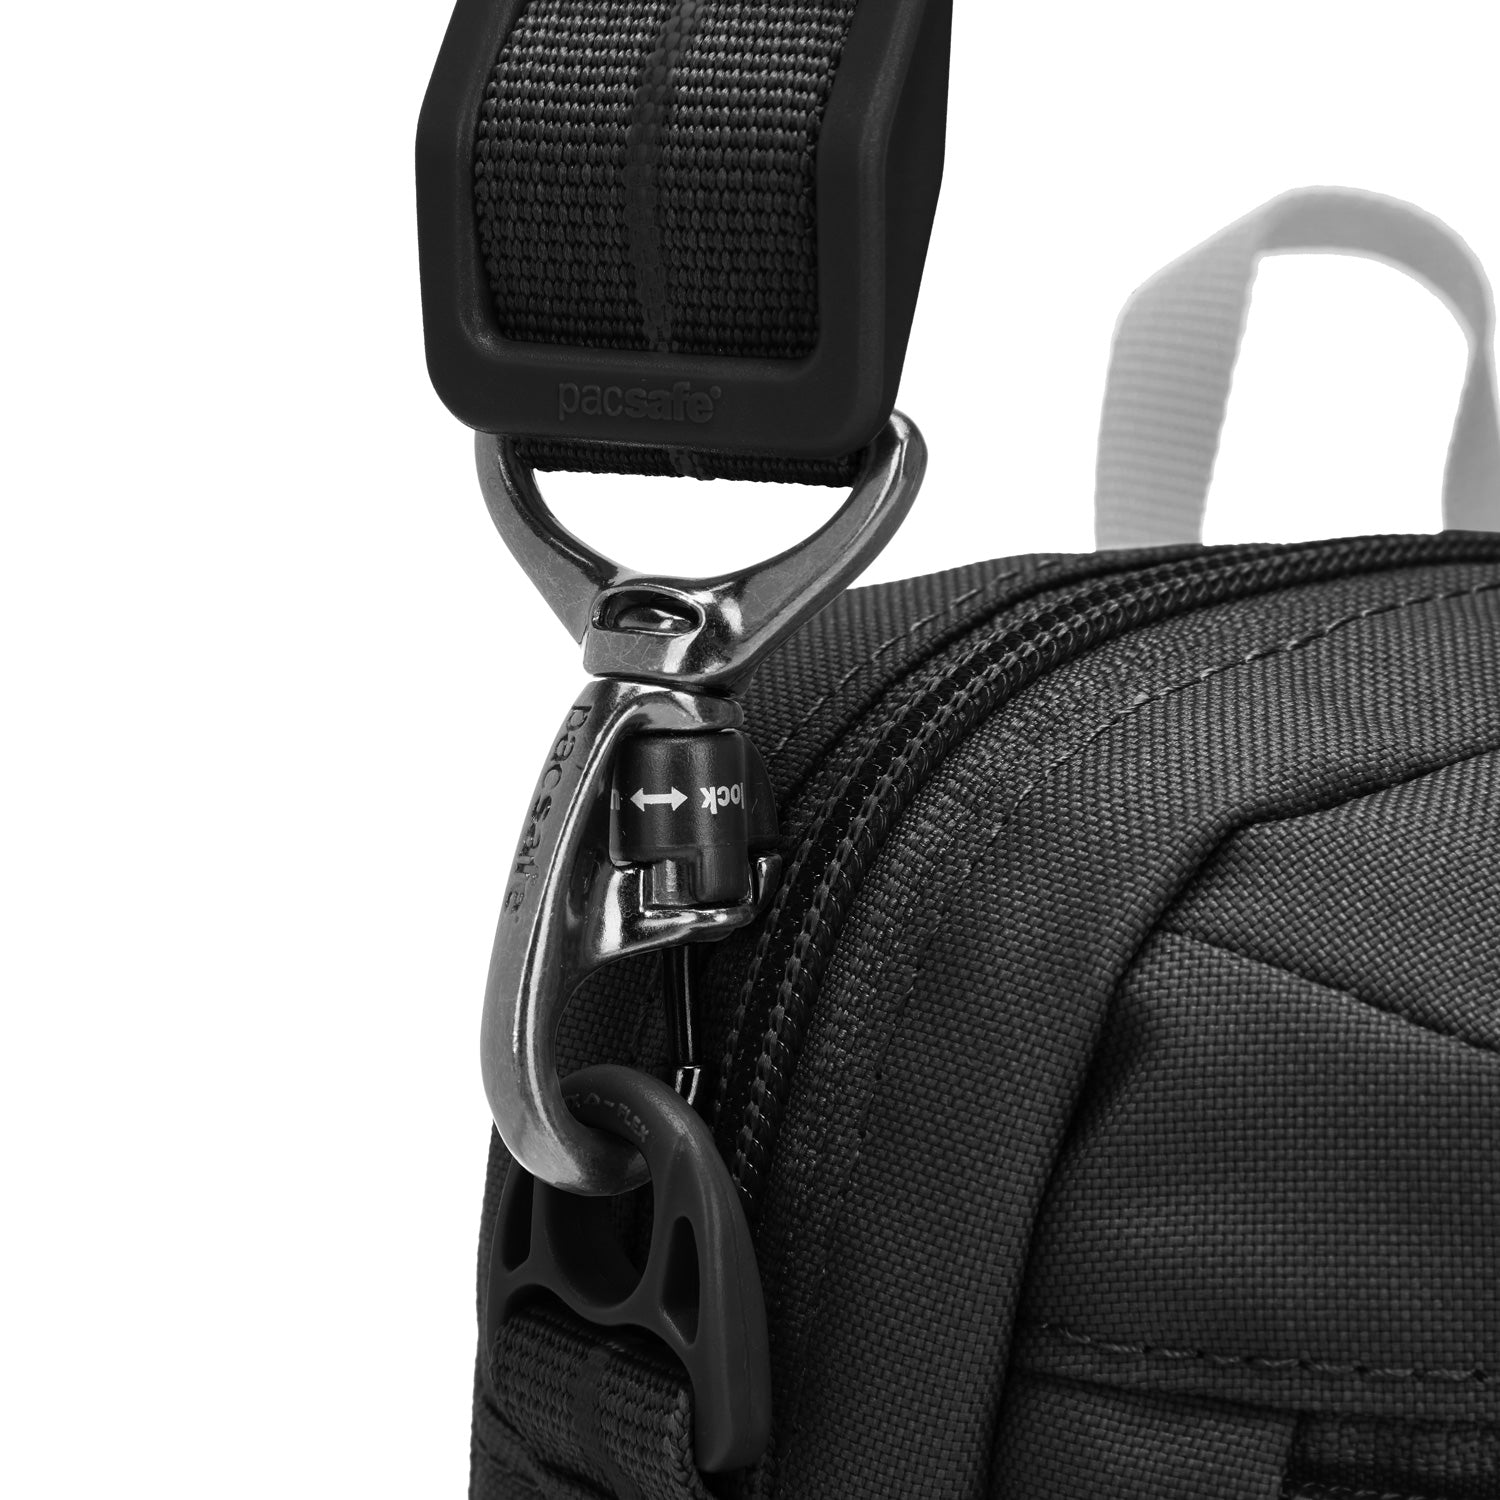 Anti-Theft Sling Pack with Hydration for Music Festivals